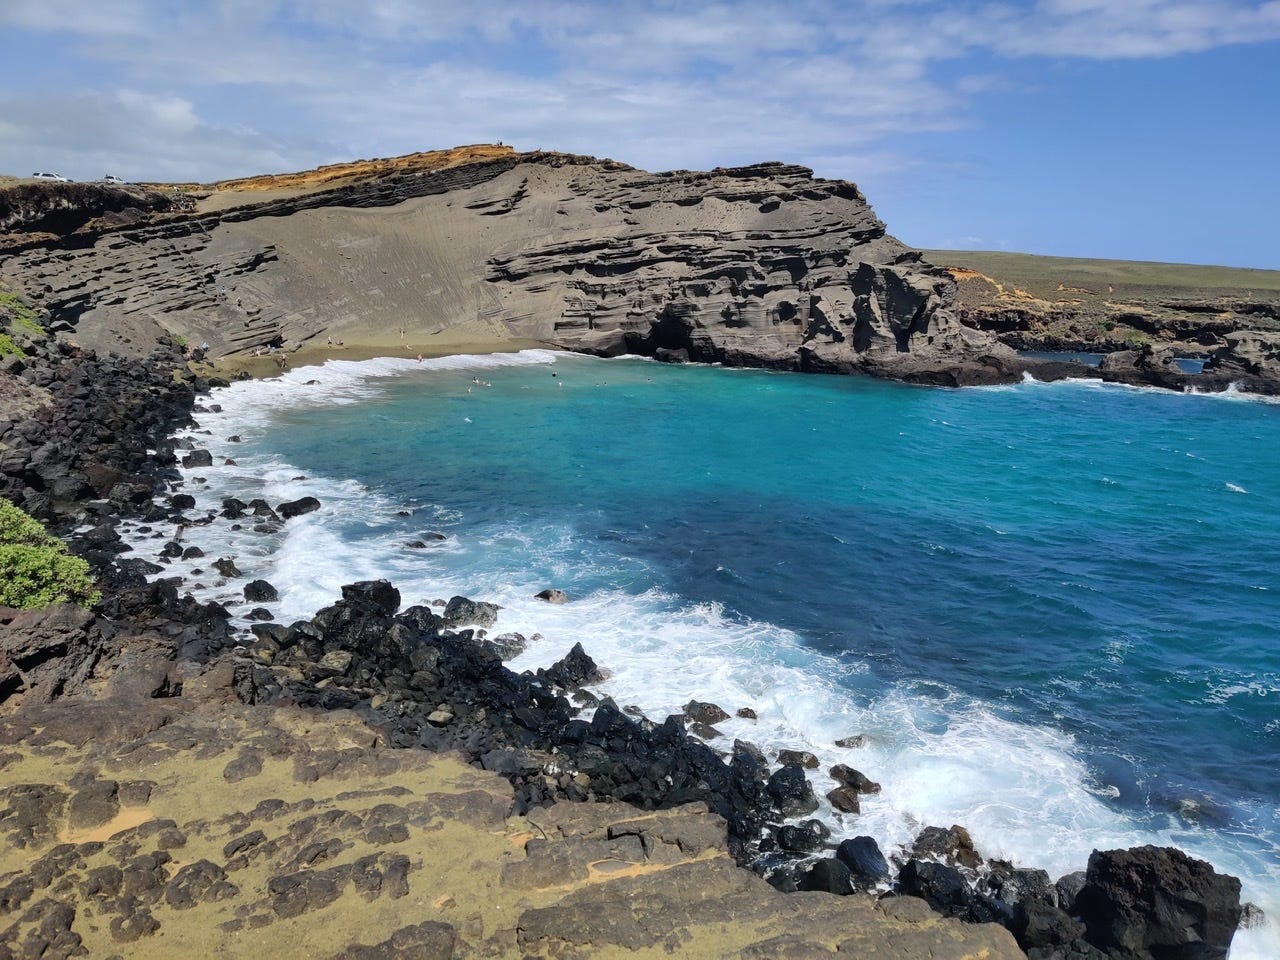 A horseshoe shaped beach with olive sand and brown cliffs and rocks, with a vibrant blue waters crashing against them.